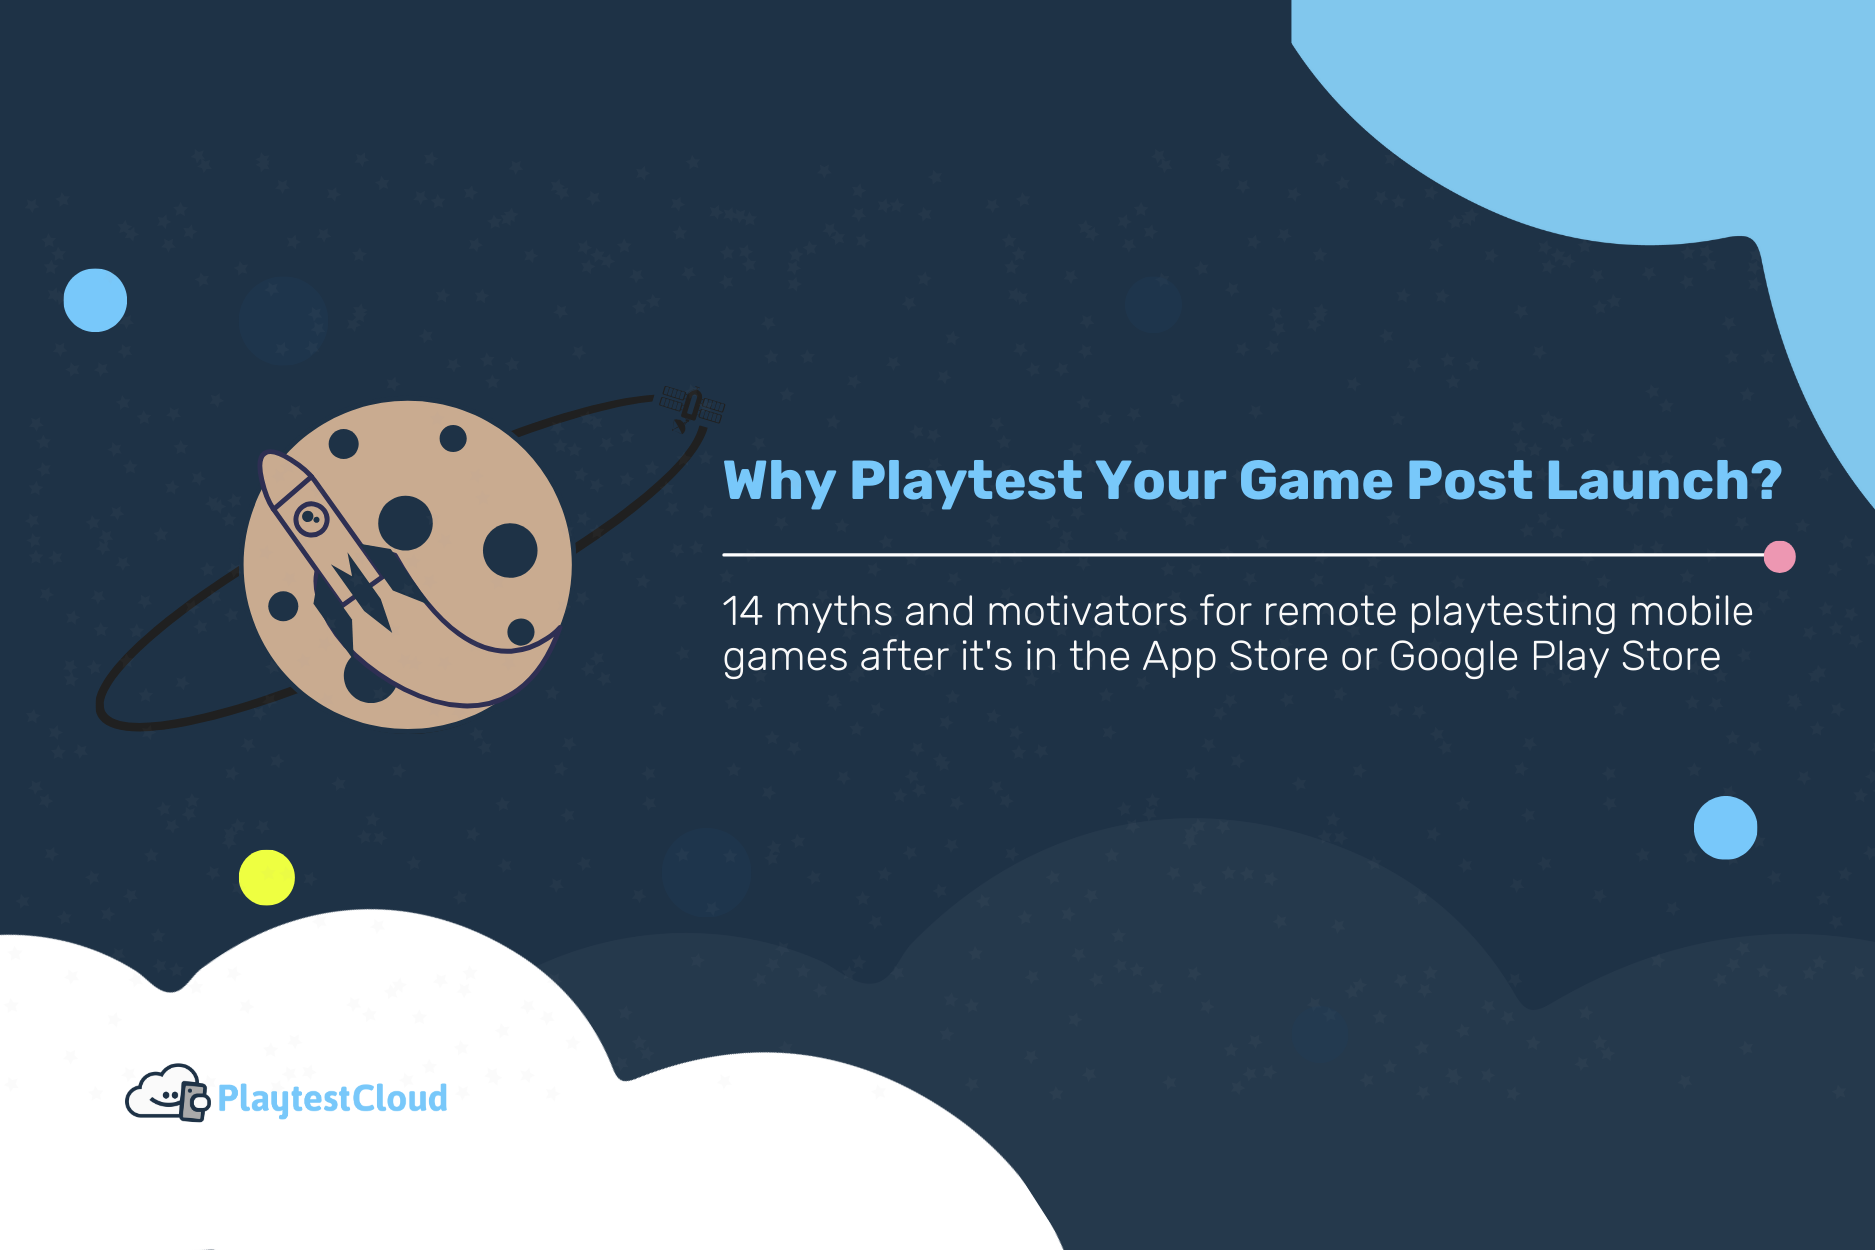 Why Playtest Your Game Post Launch?